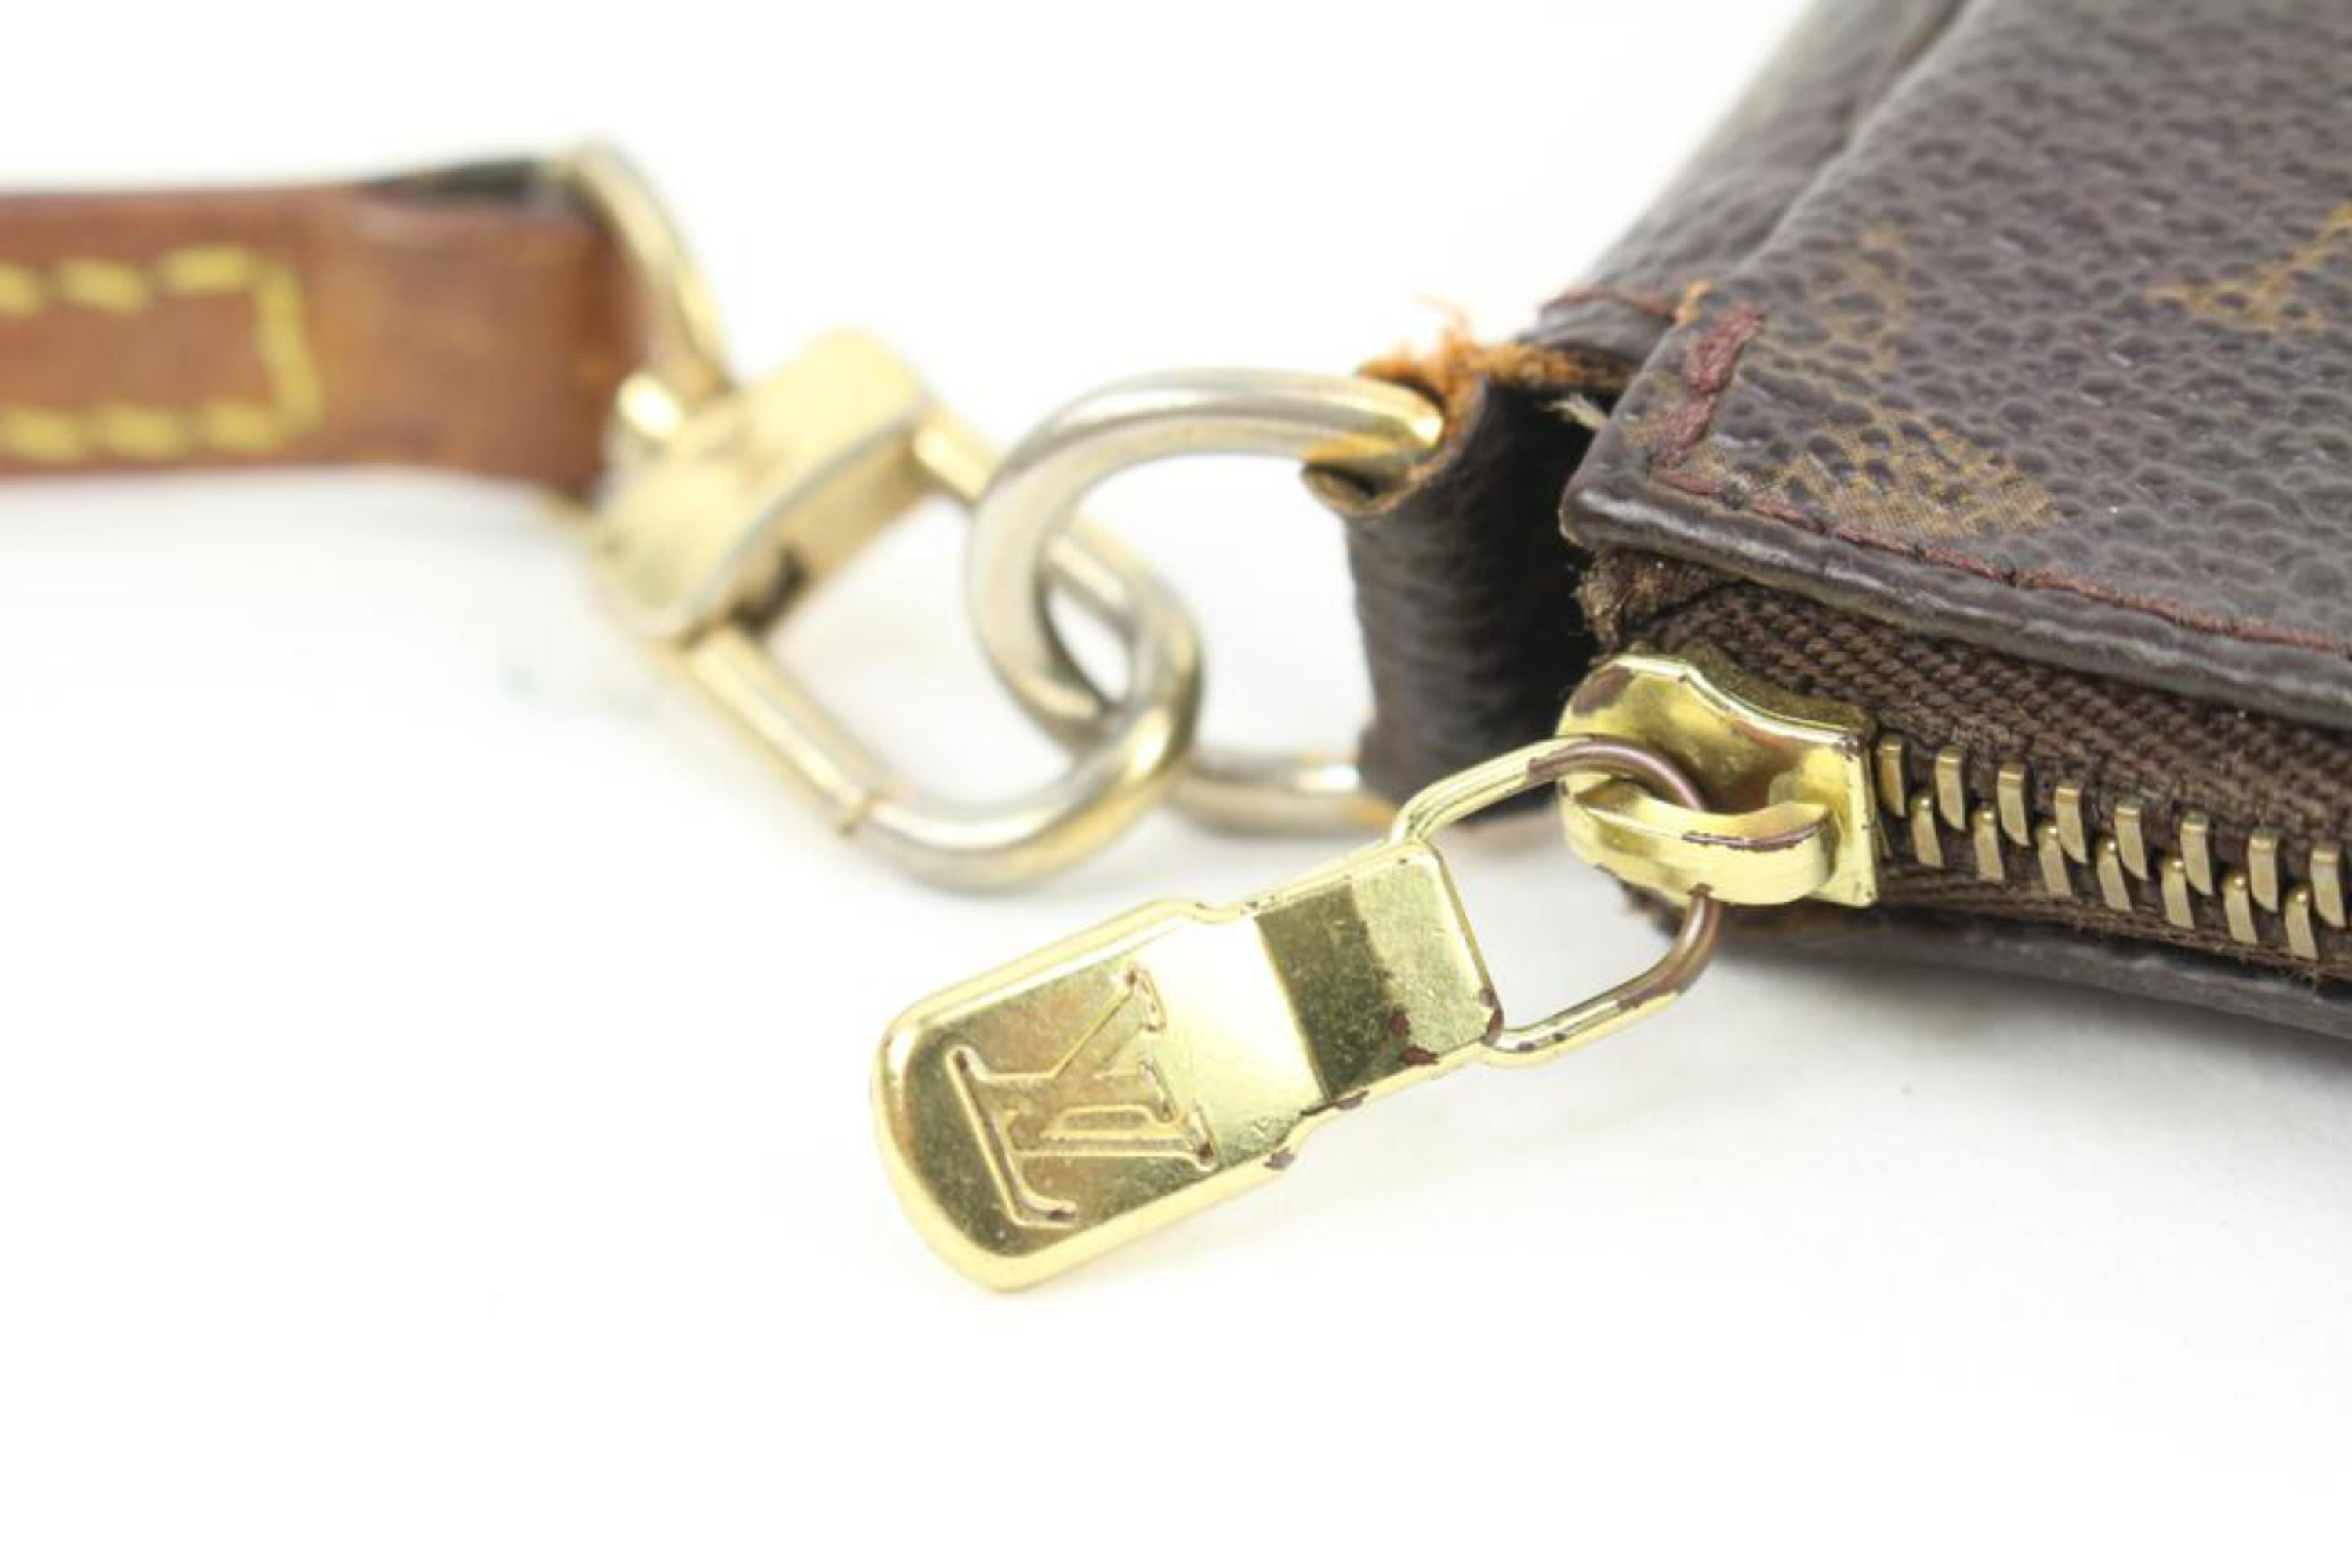 Louis Vuitton Monogram Pochette Accessoires with Long Strap 121lv57 In Good Condition For Sale In Dix hills, NY